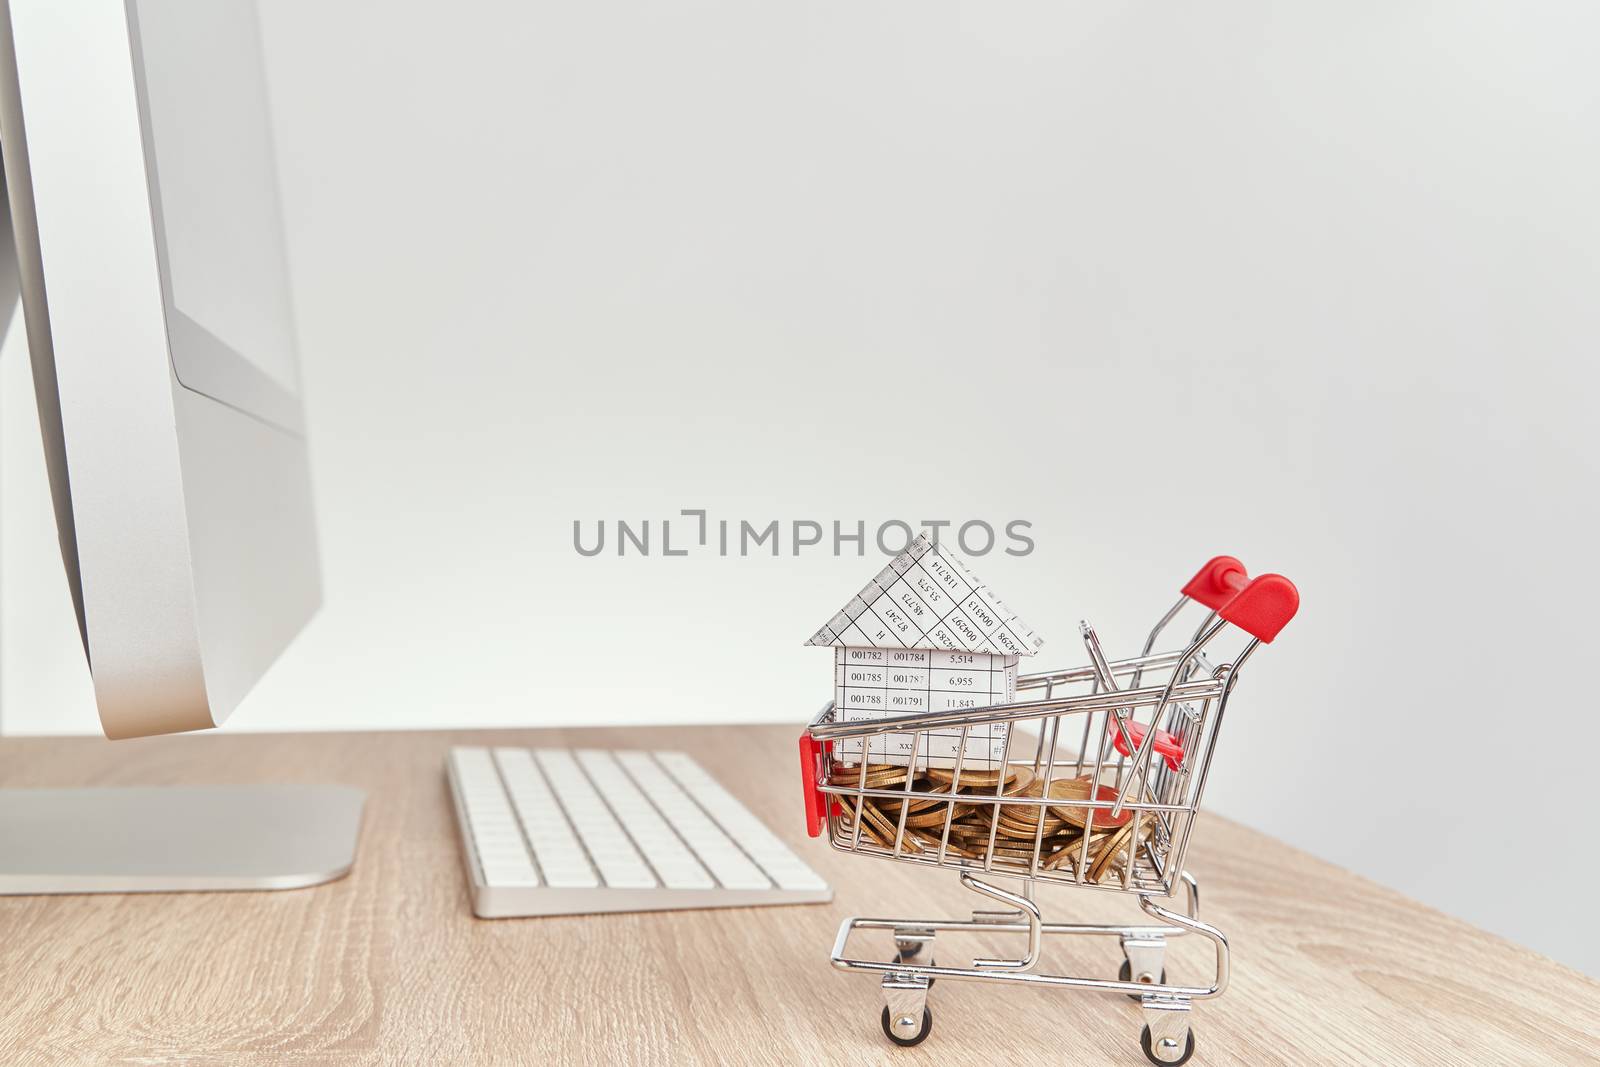 House on gold coins in shopping cart on wooden computer table with white background and copy space. Business and finance concepts shopping online photography.